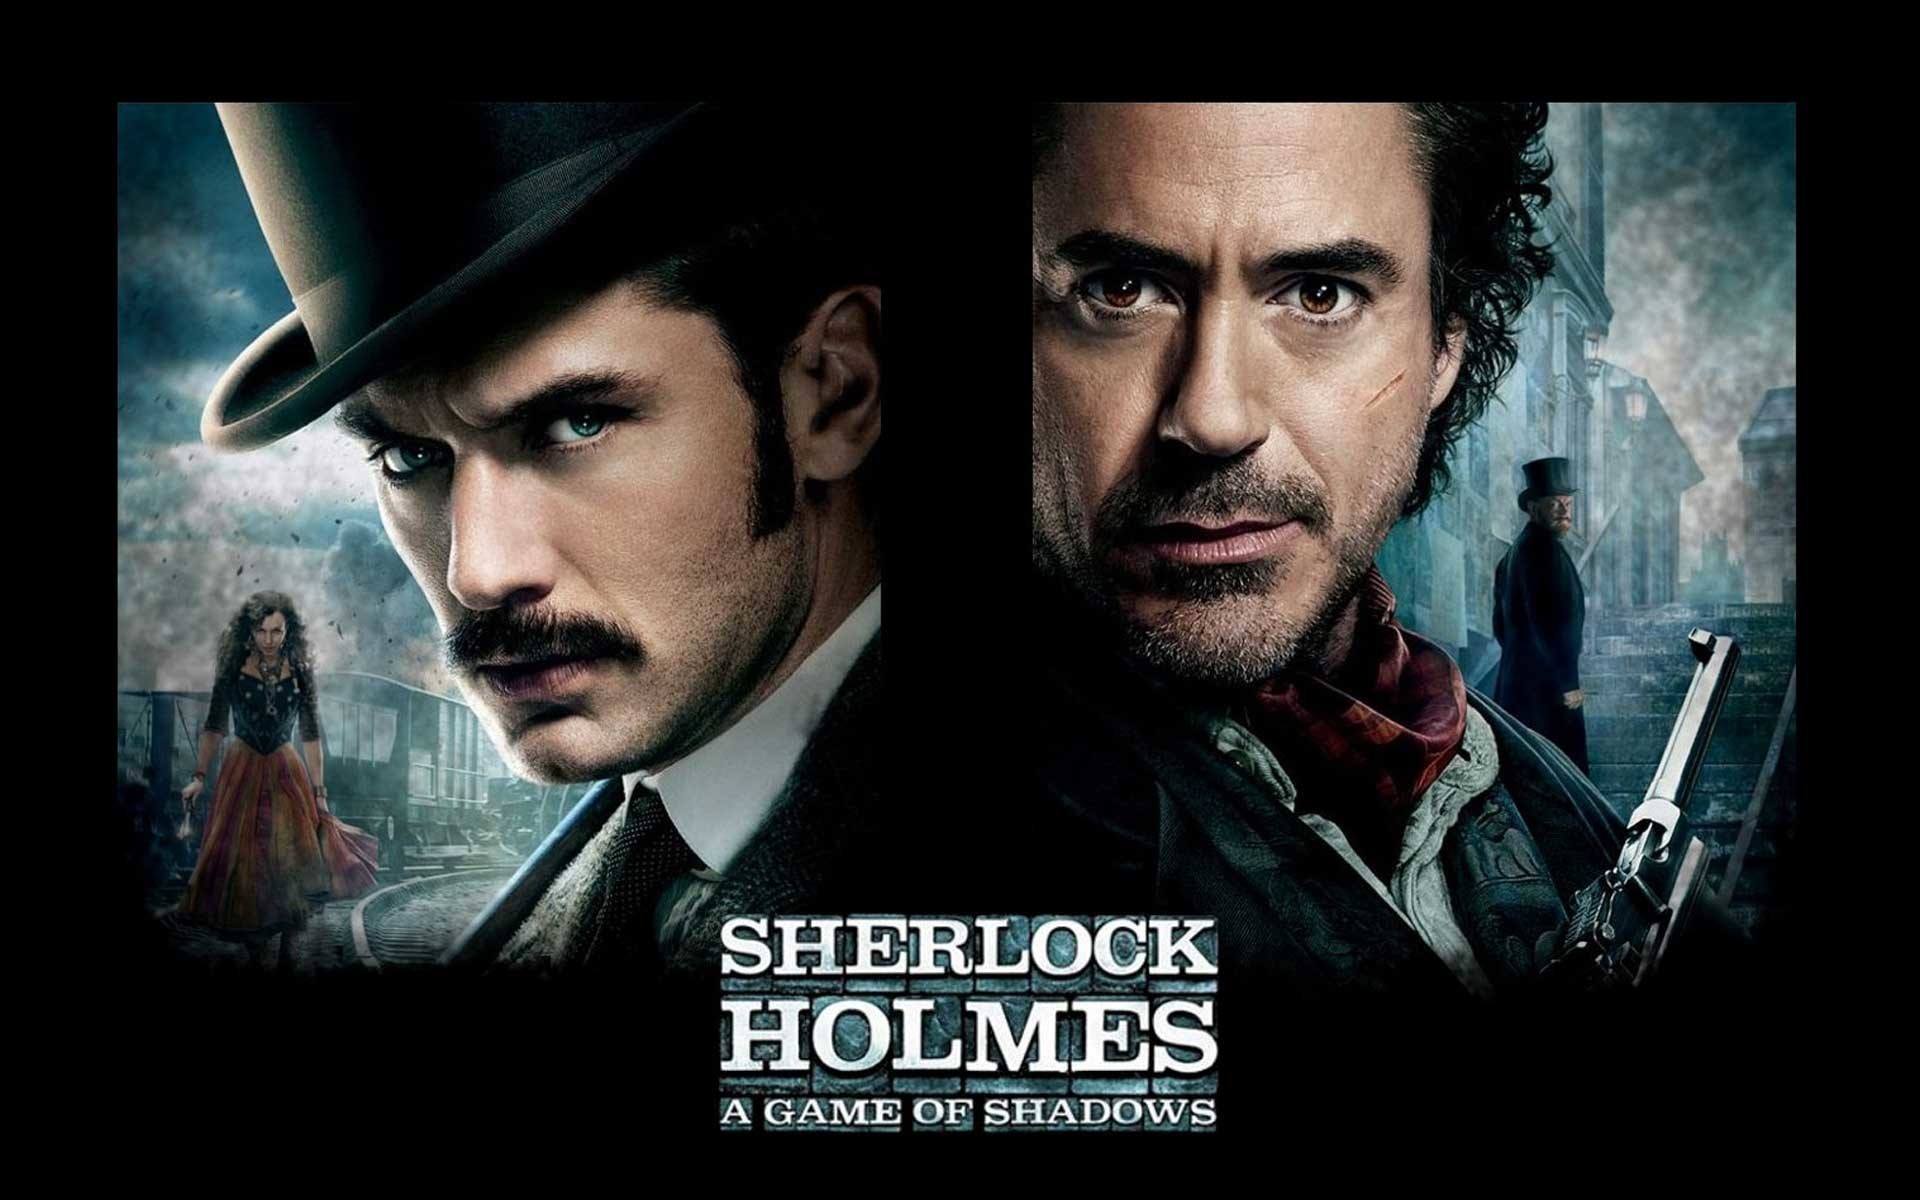 1920x1200 Fine Computer Sherlock Holmes Wallpapers and Pictures, Sherlock Holmes High  HD Quality Backgrounds .